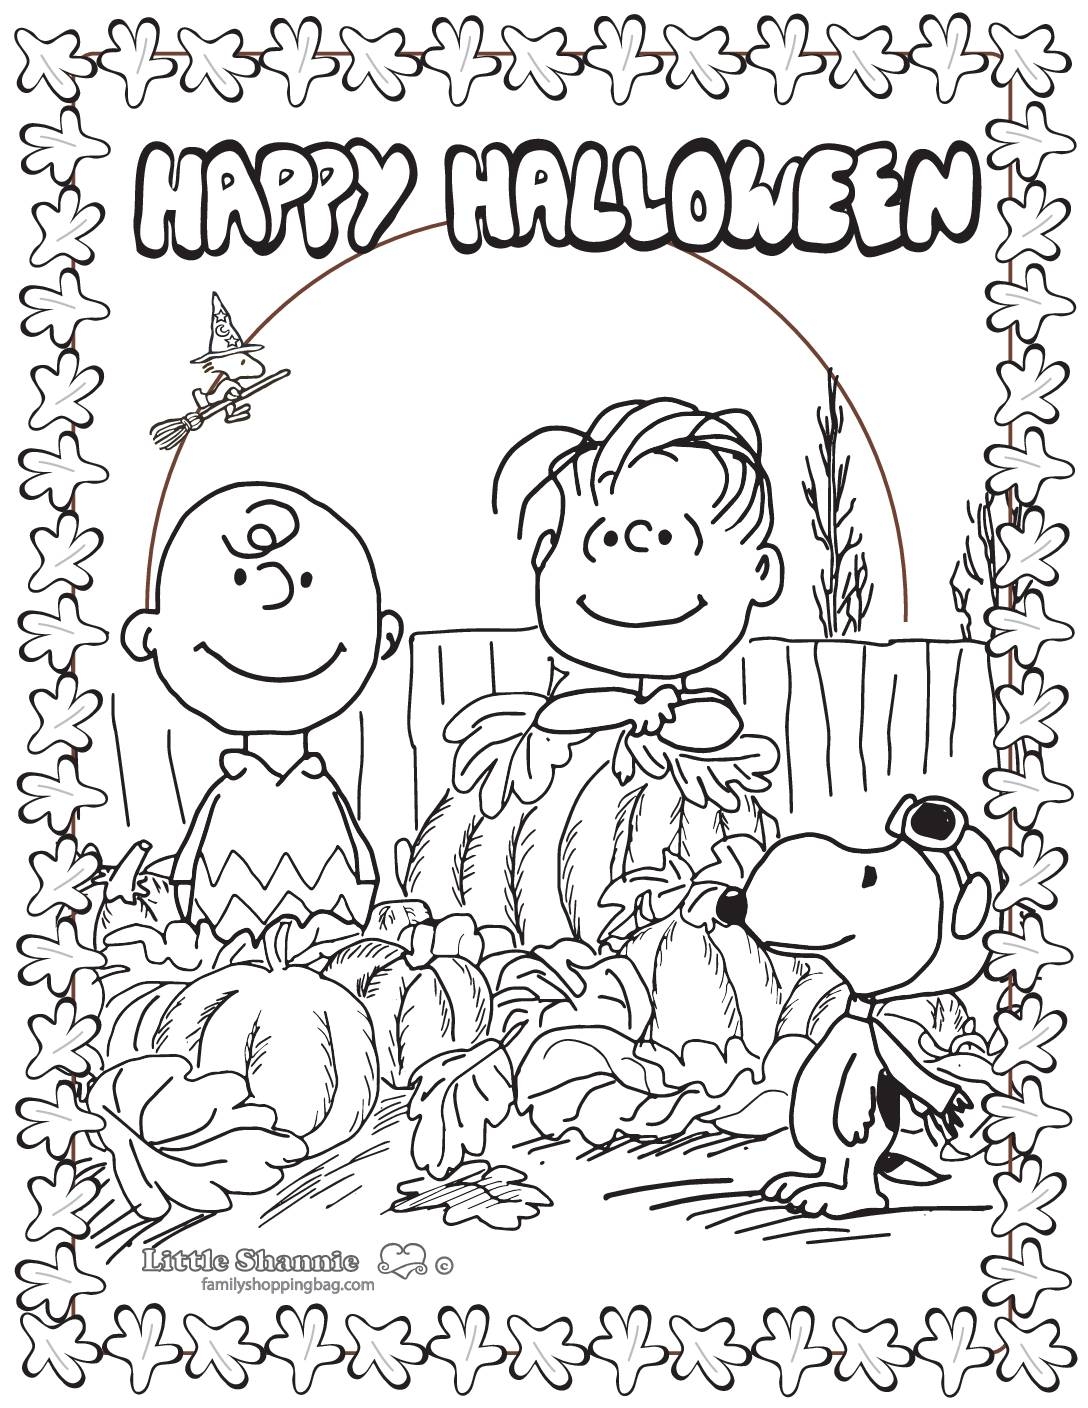 Free Printable Halloween Peanuts Coloring Pages And More Lil Shannie - Free Printable Charlie Brown Halloween Coloring Pages